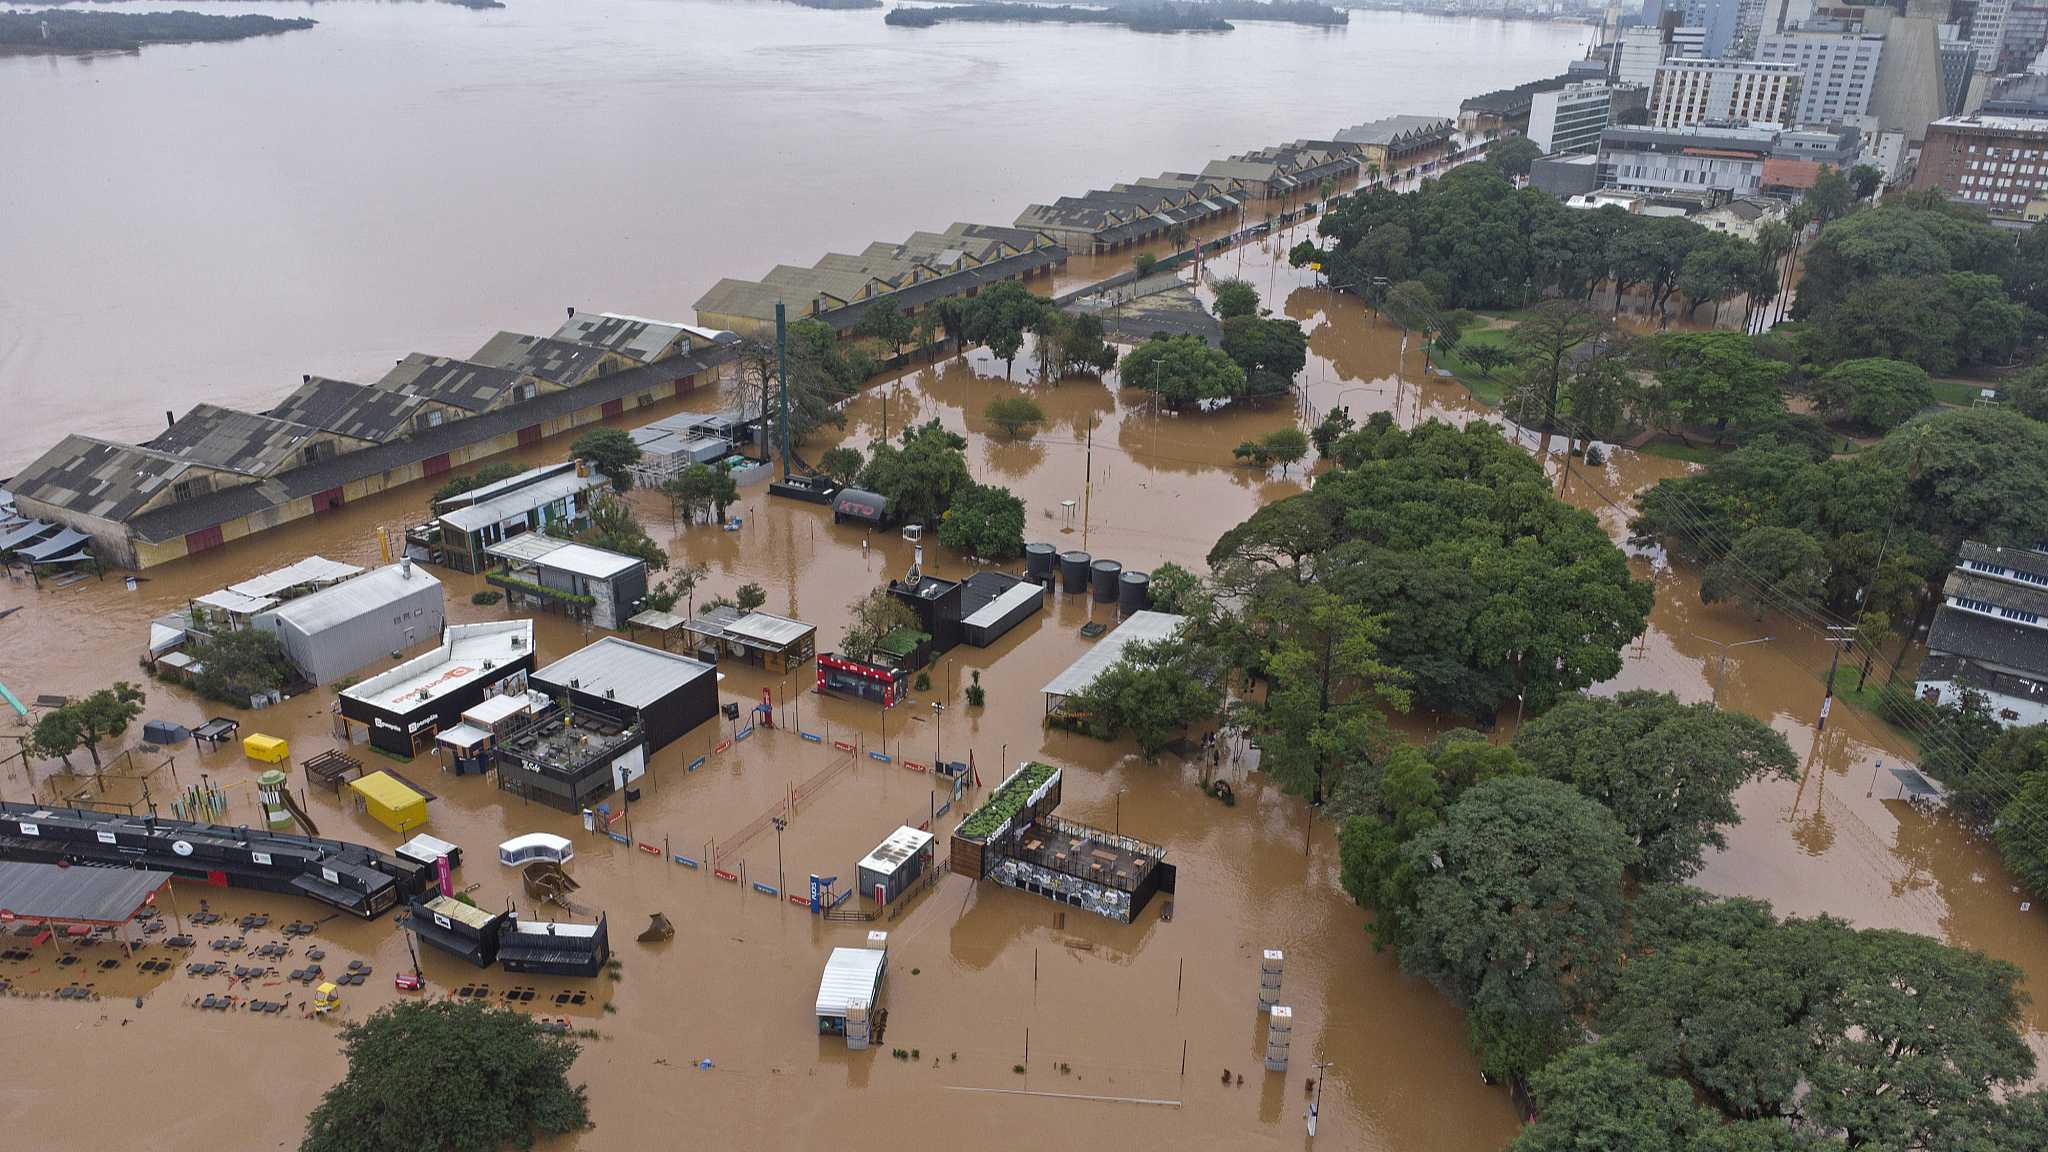 Floods in southern Brazil force 70,000 from homes